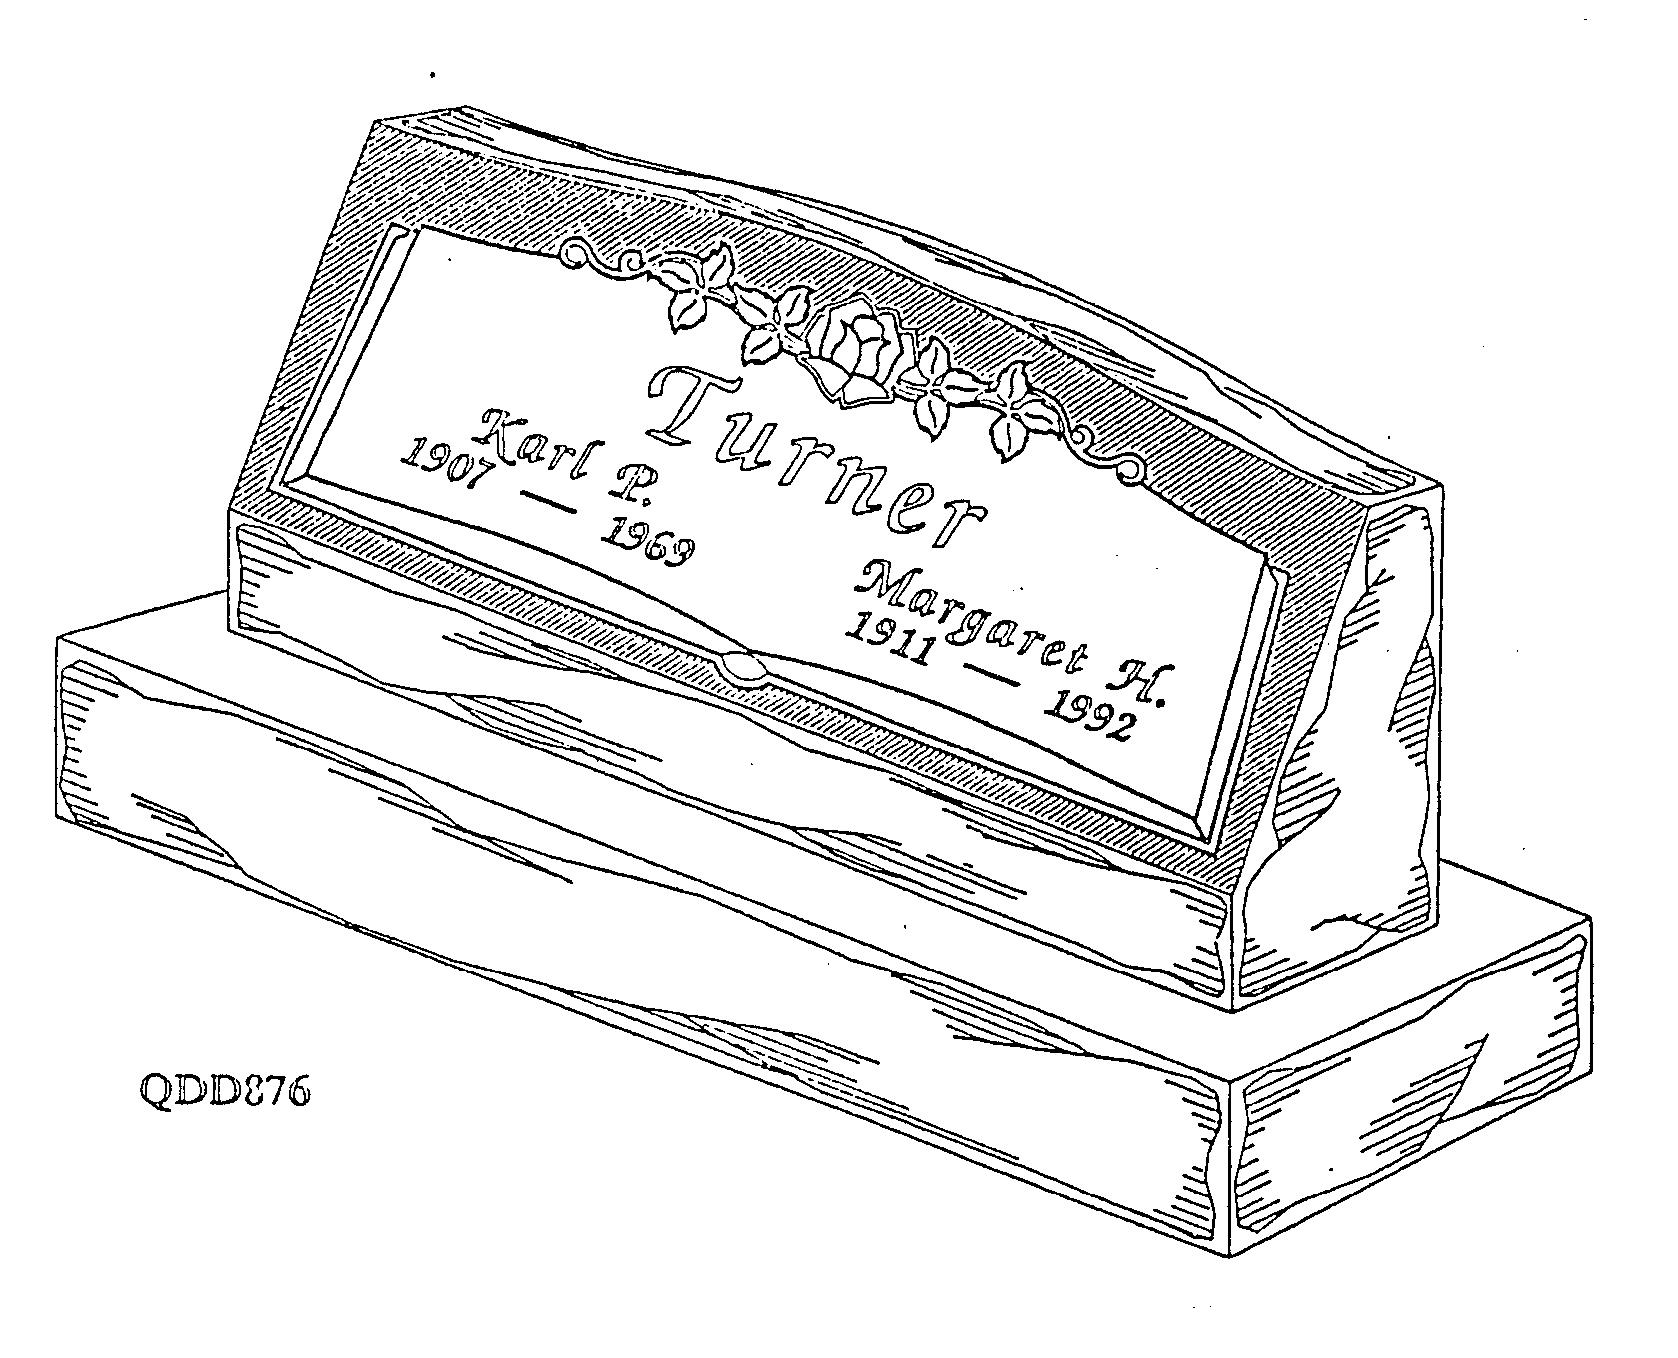 a black and white drawing of a gravestone for turner